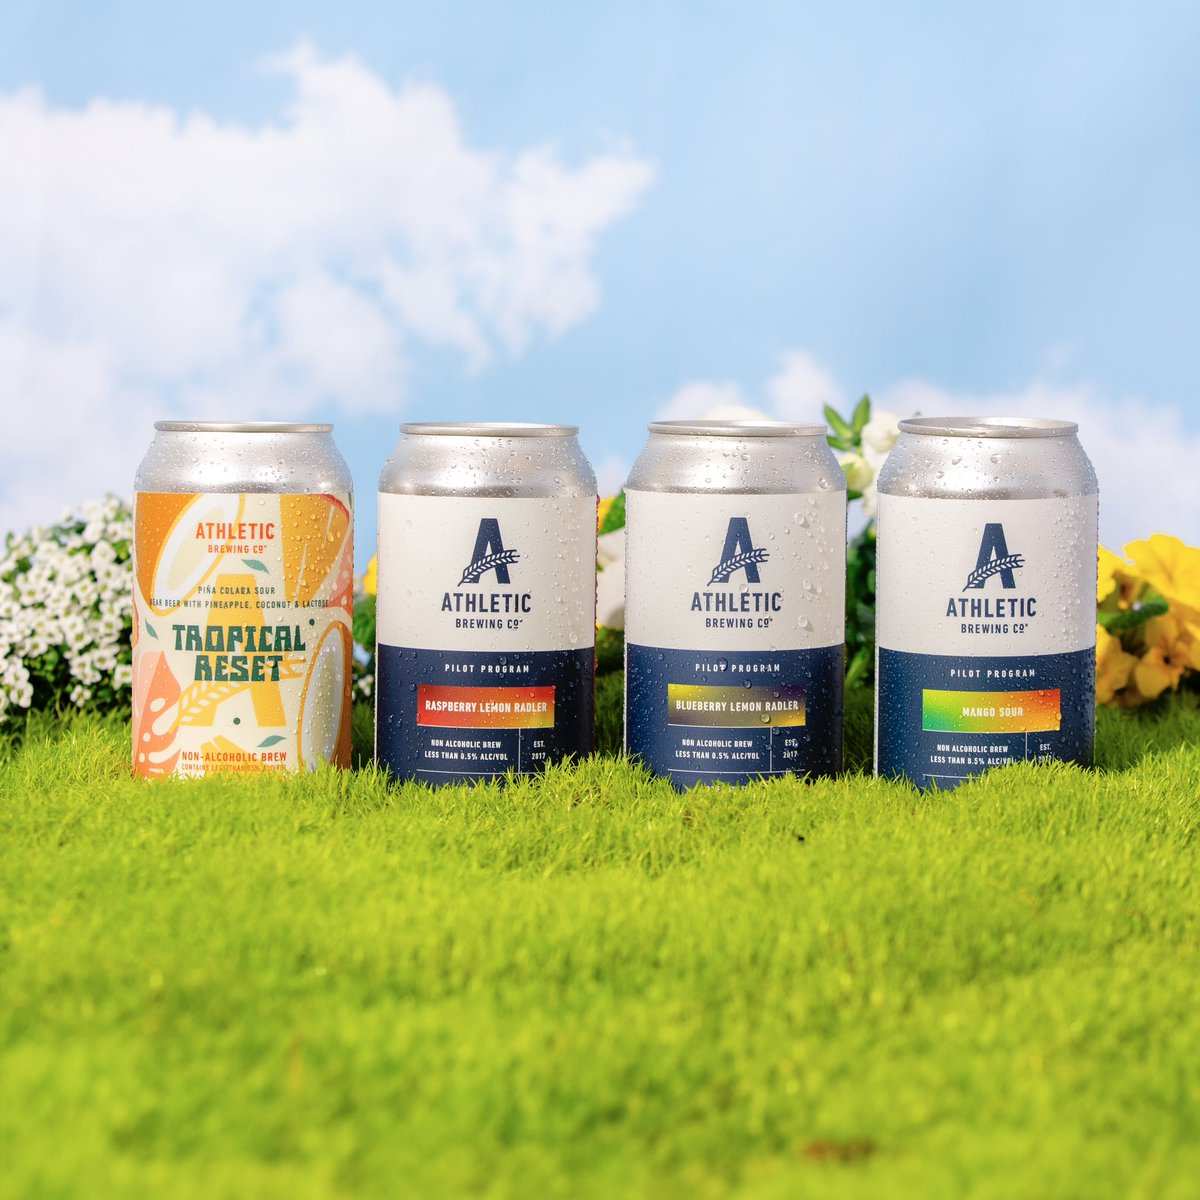 Spring is here…and so is our Sweet & Sour Pack. Order from the link below, and you’ll be sipping your way into warmer weather one radler and sour at a time. This pack featuring two radlers and two sours is available while the flowers bloom. bit.ly/3VMEItc